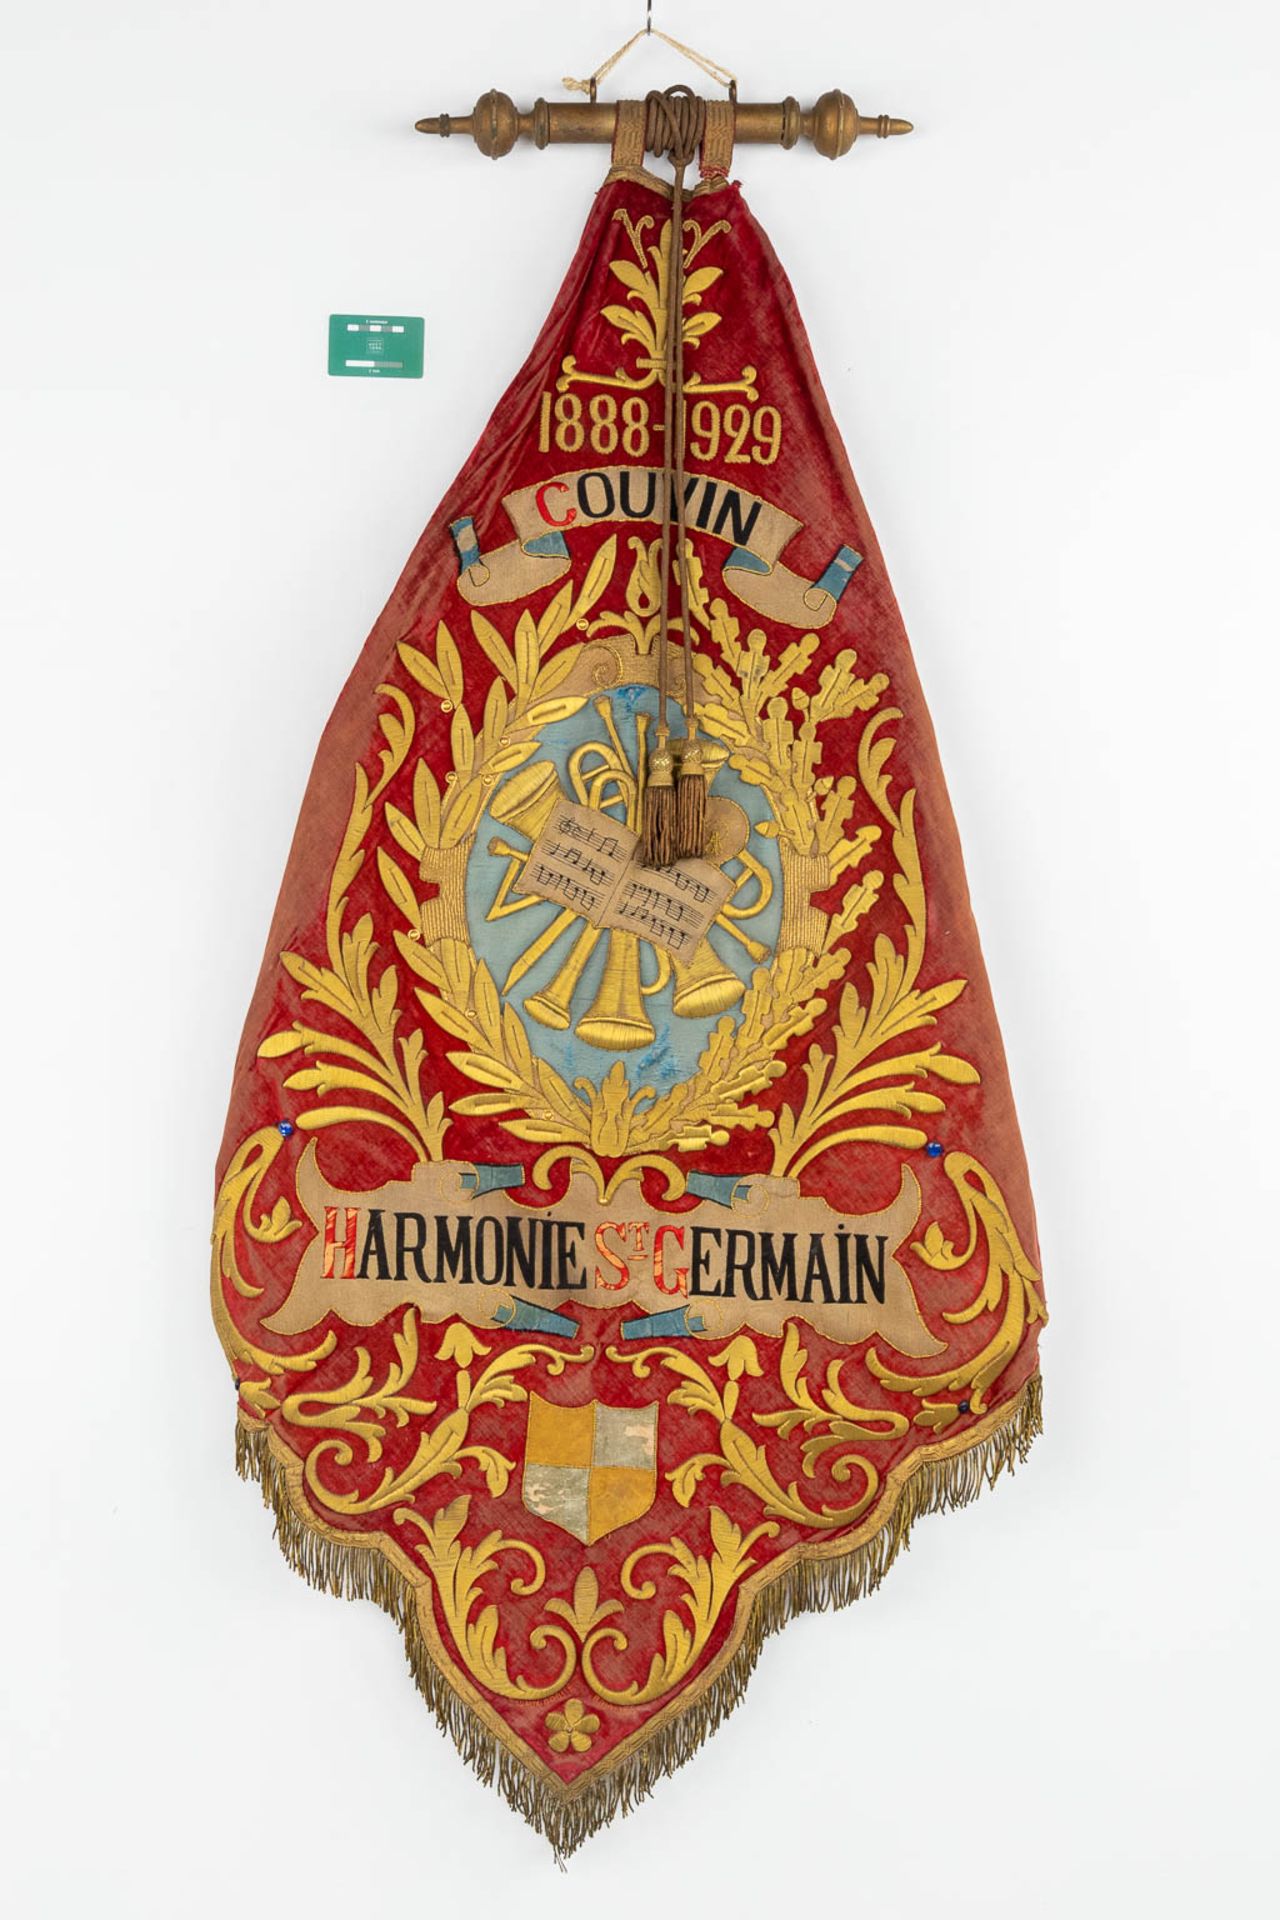 An antique banner, 'Harmonie Saint Germain, Couvin', and used in the front of a marching orchestra. - Image 2 of 10